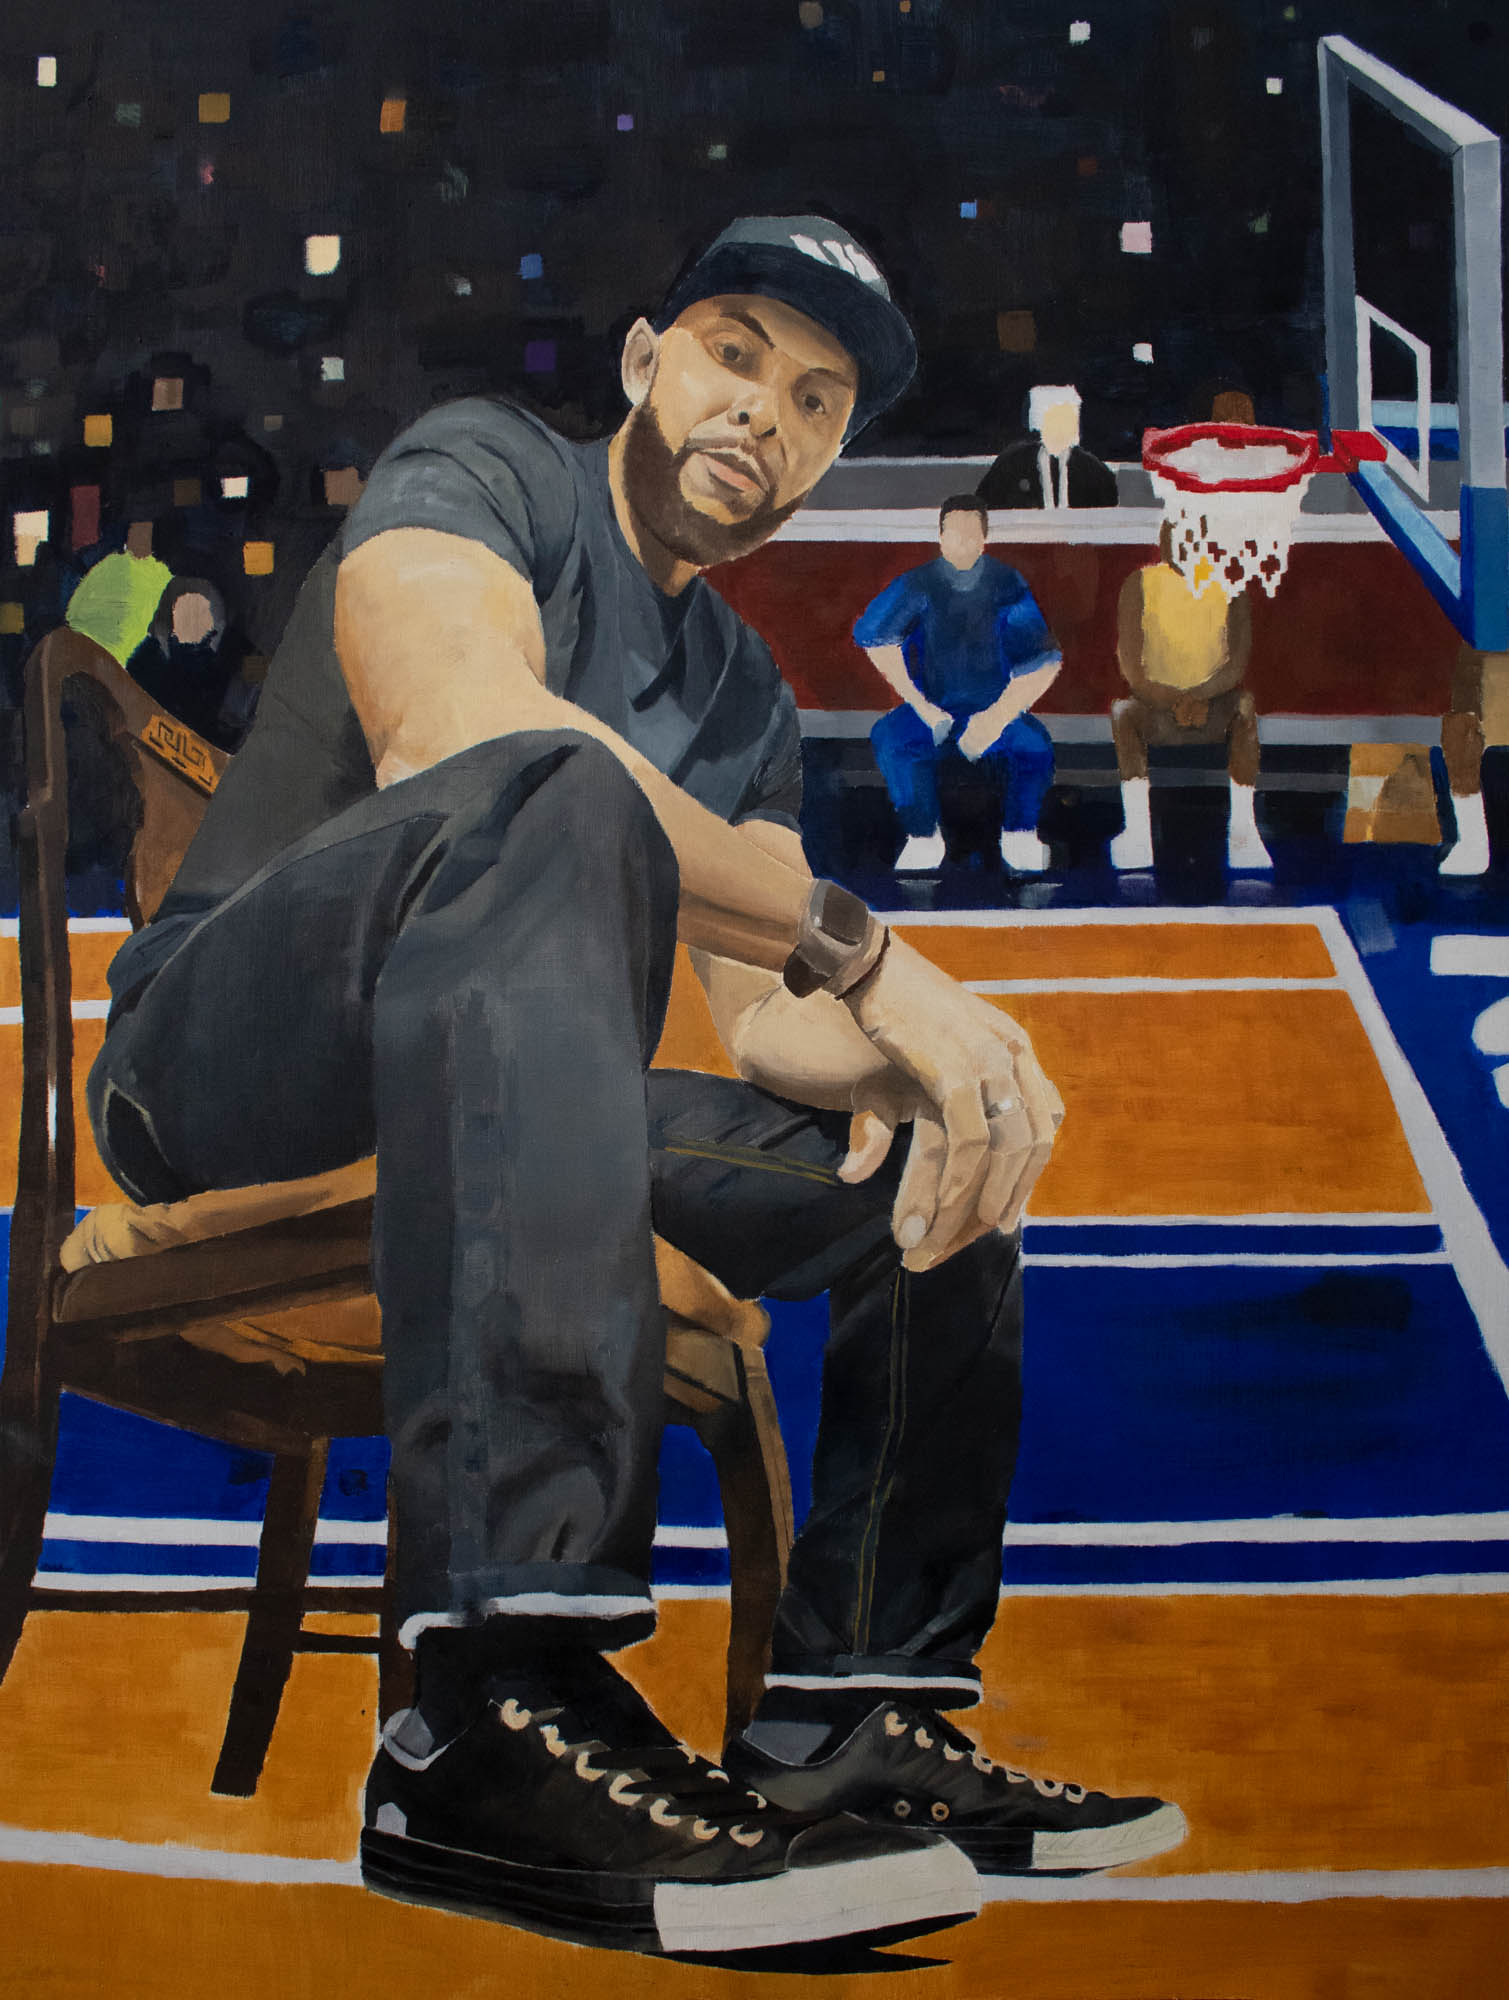 Portrait showing a man sitting in a chair with a basketball court serving as the background with colored squares serving as the audience. He is wearing pants, a shirt, hat, and a watch.